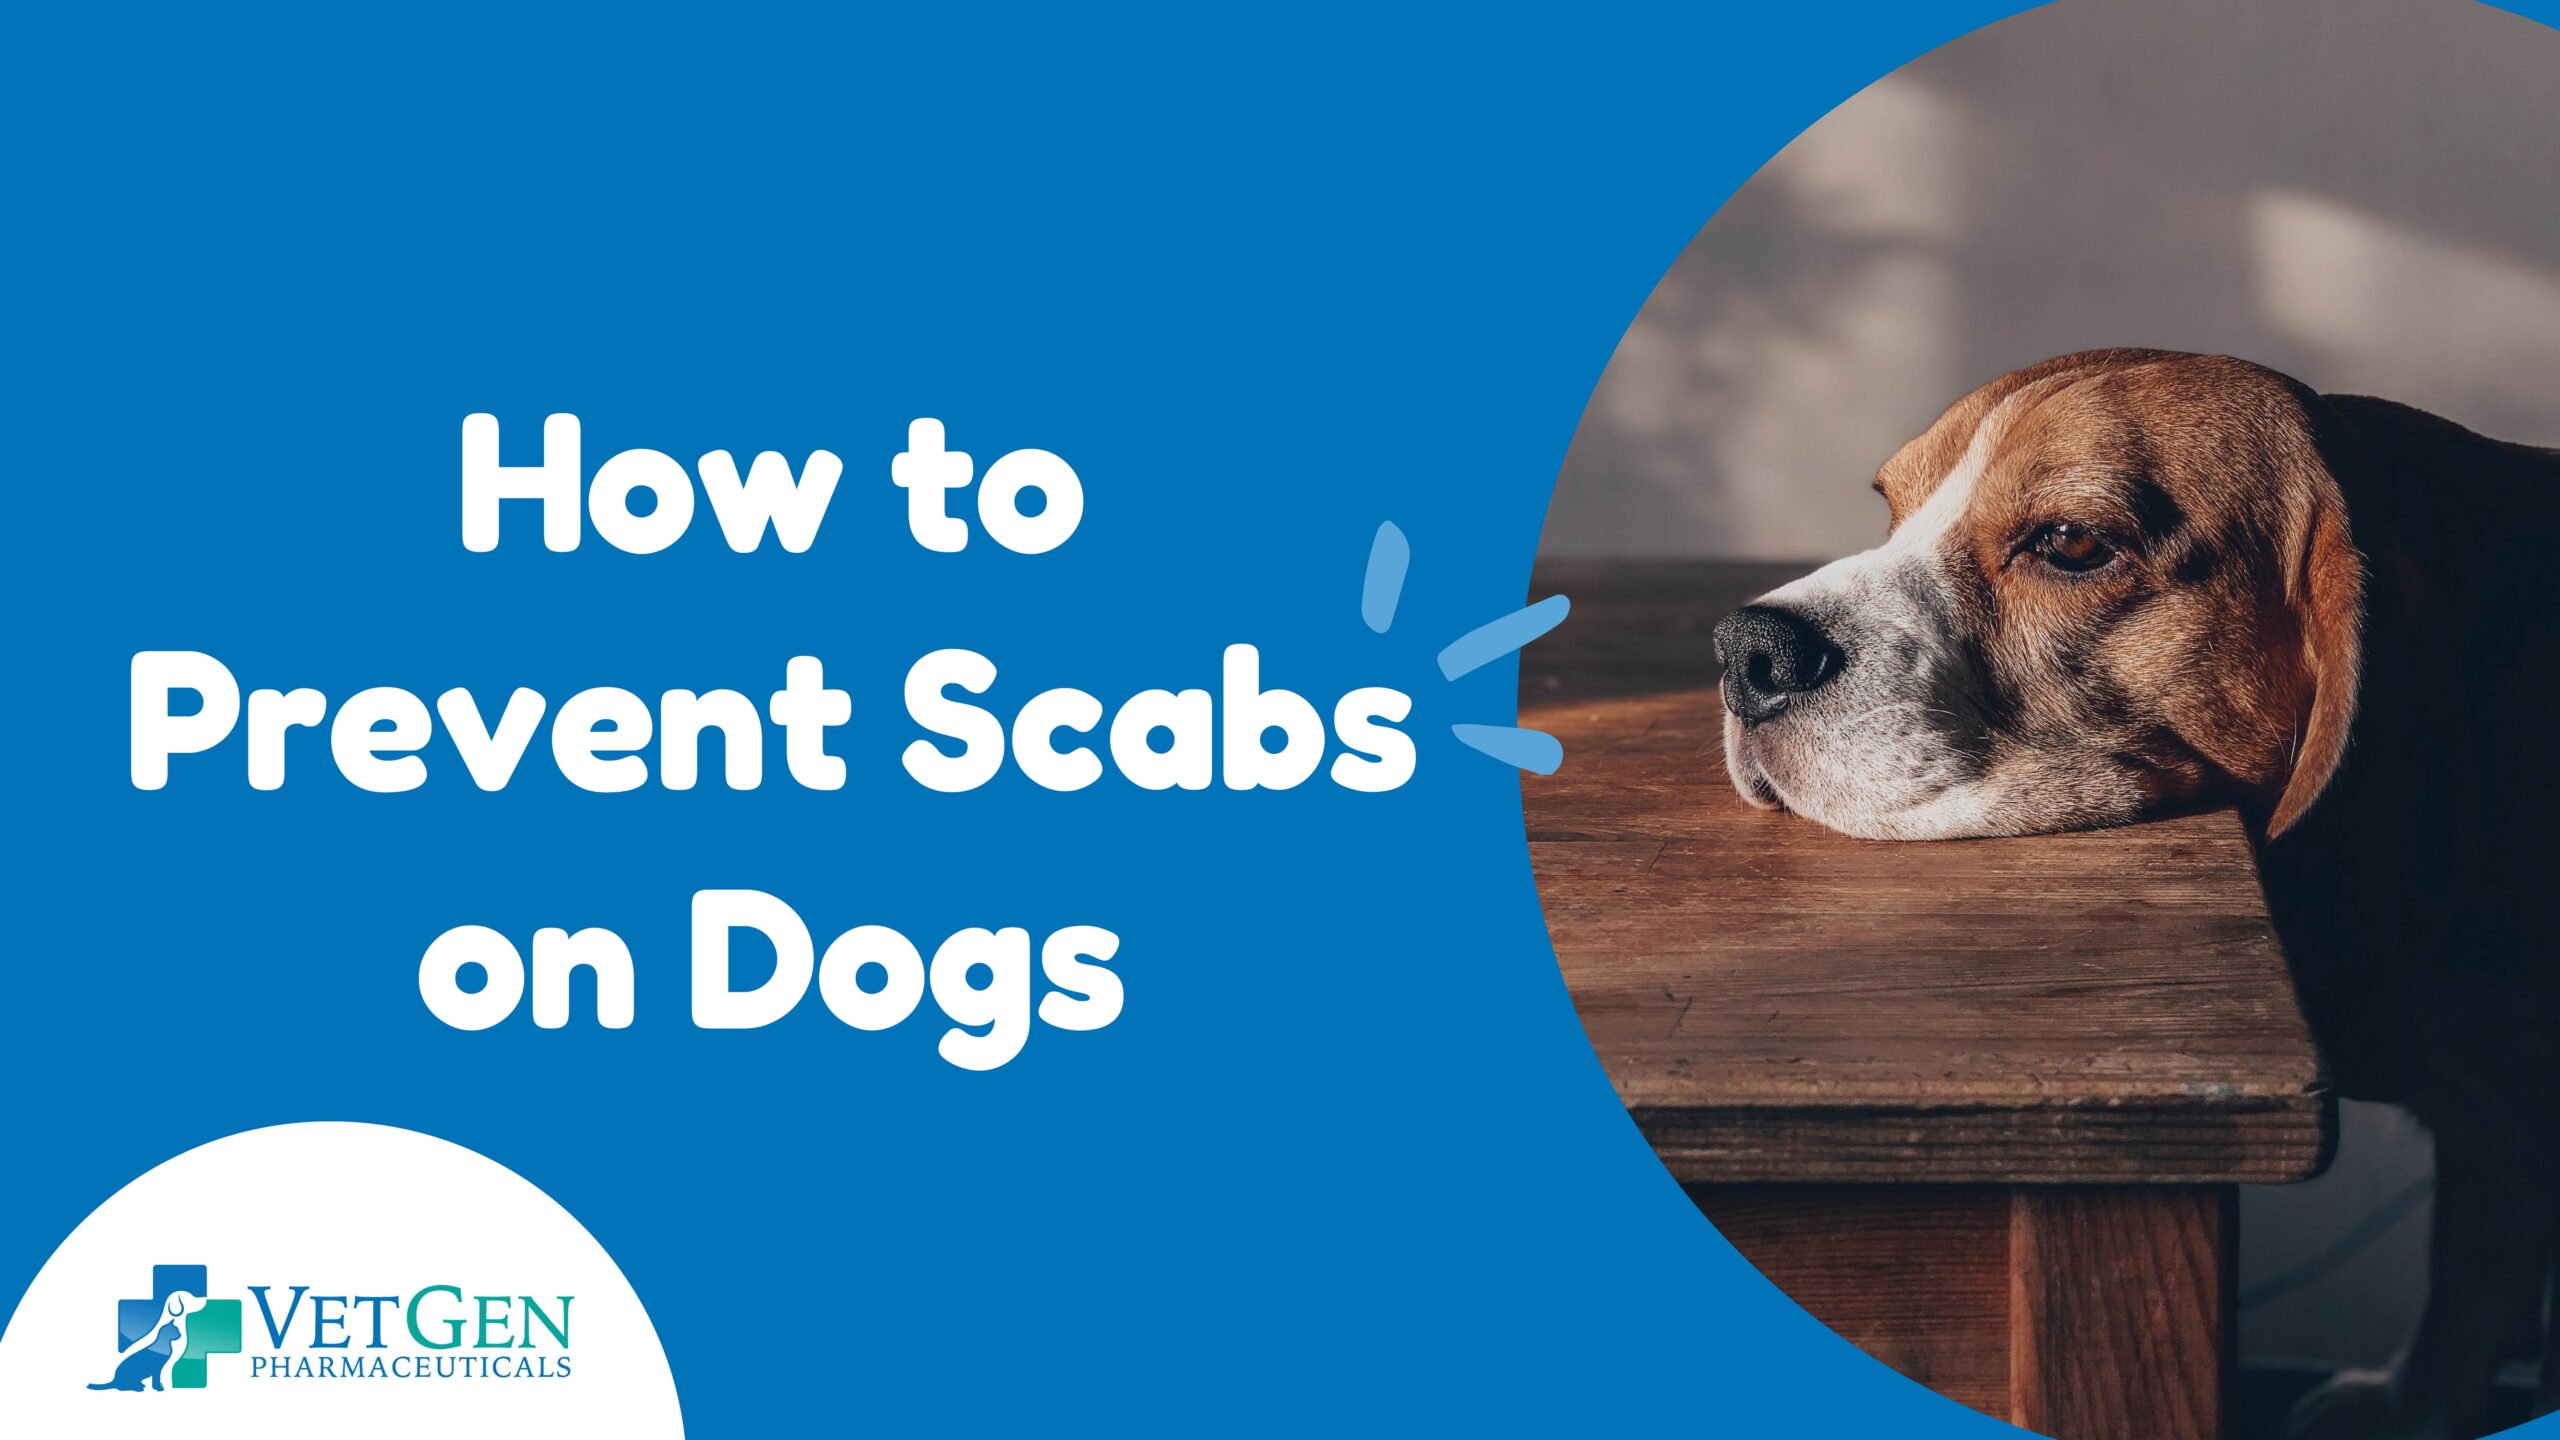 How to Prevent Scabs on Dogs